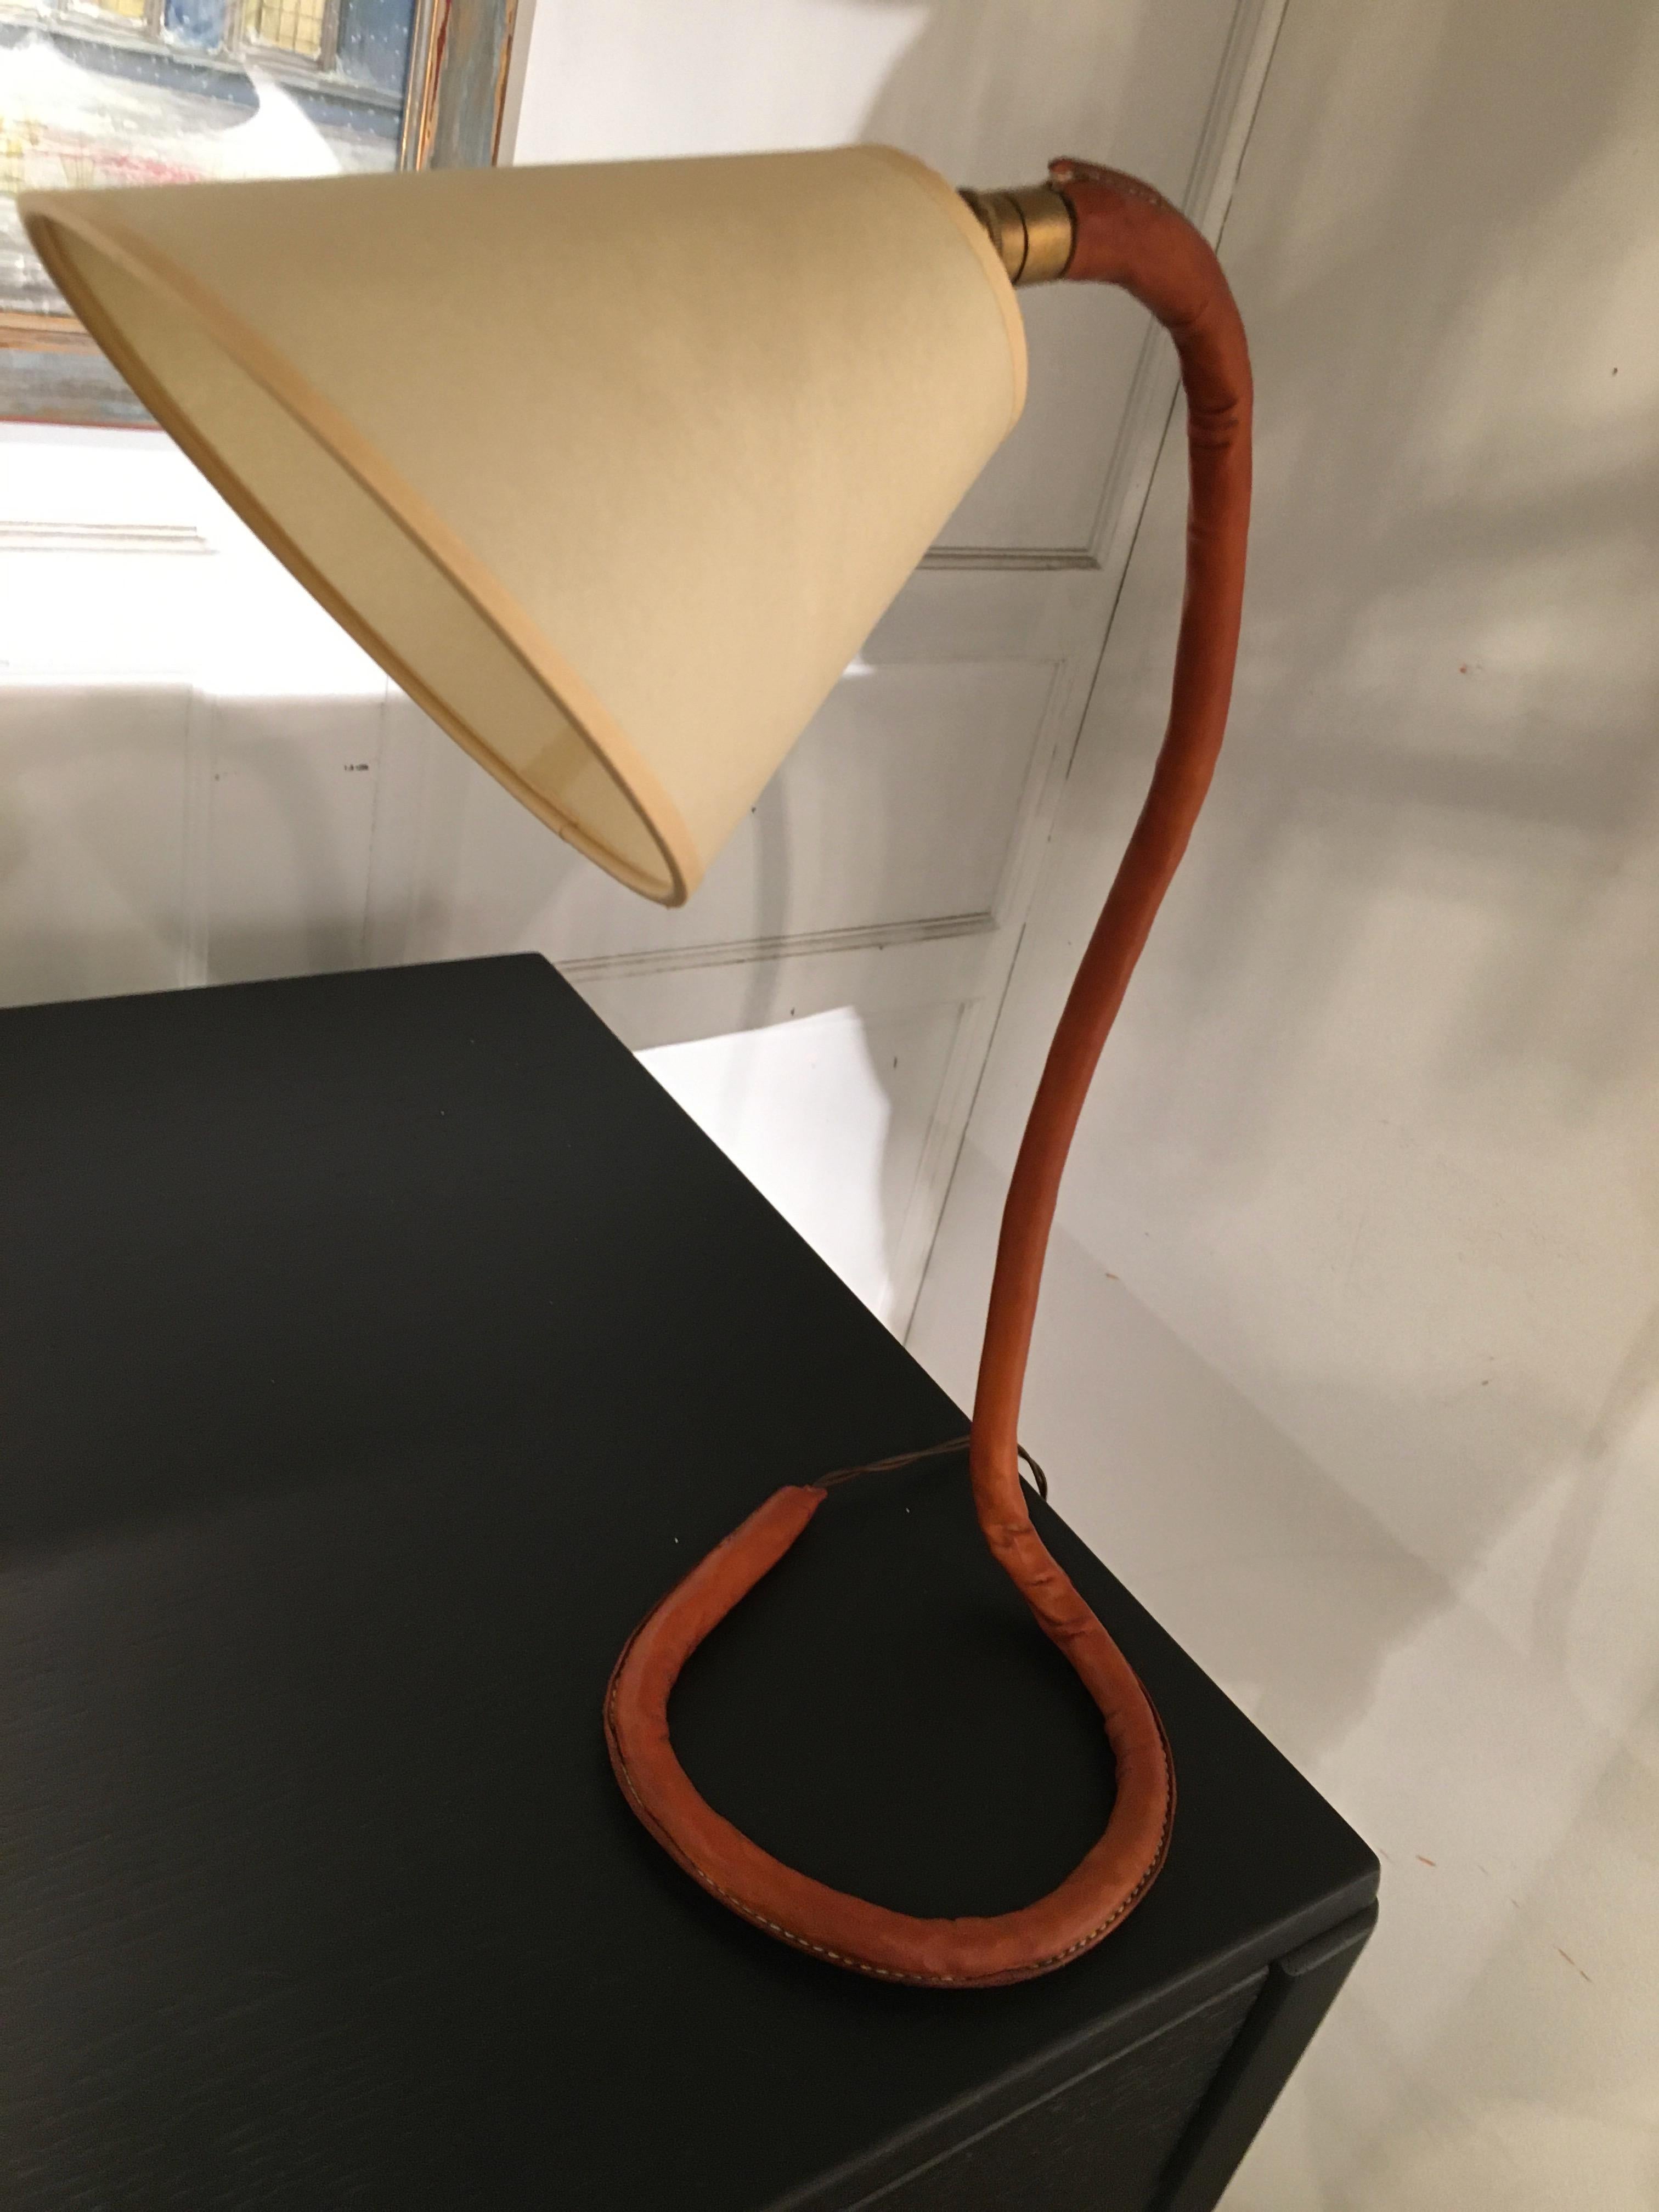 Fine Hermès brown leather table lamp designed by Jacques Adnet.
Adjustable, one light.
Vintage condition.
Circa 1950.